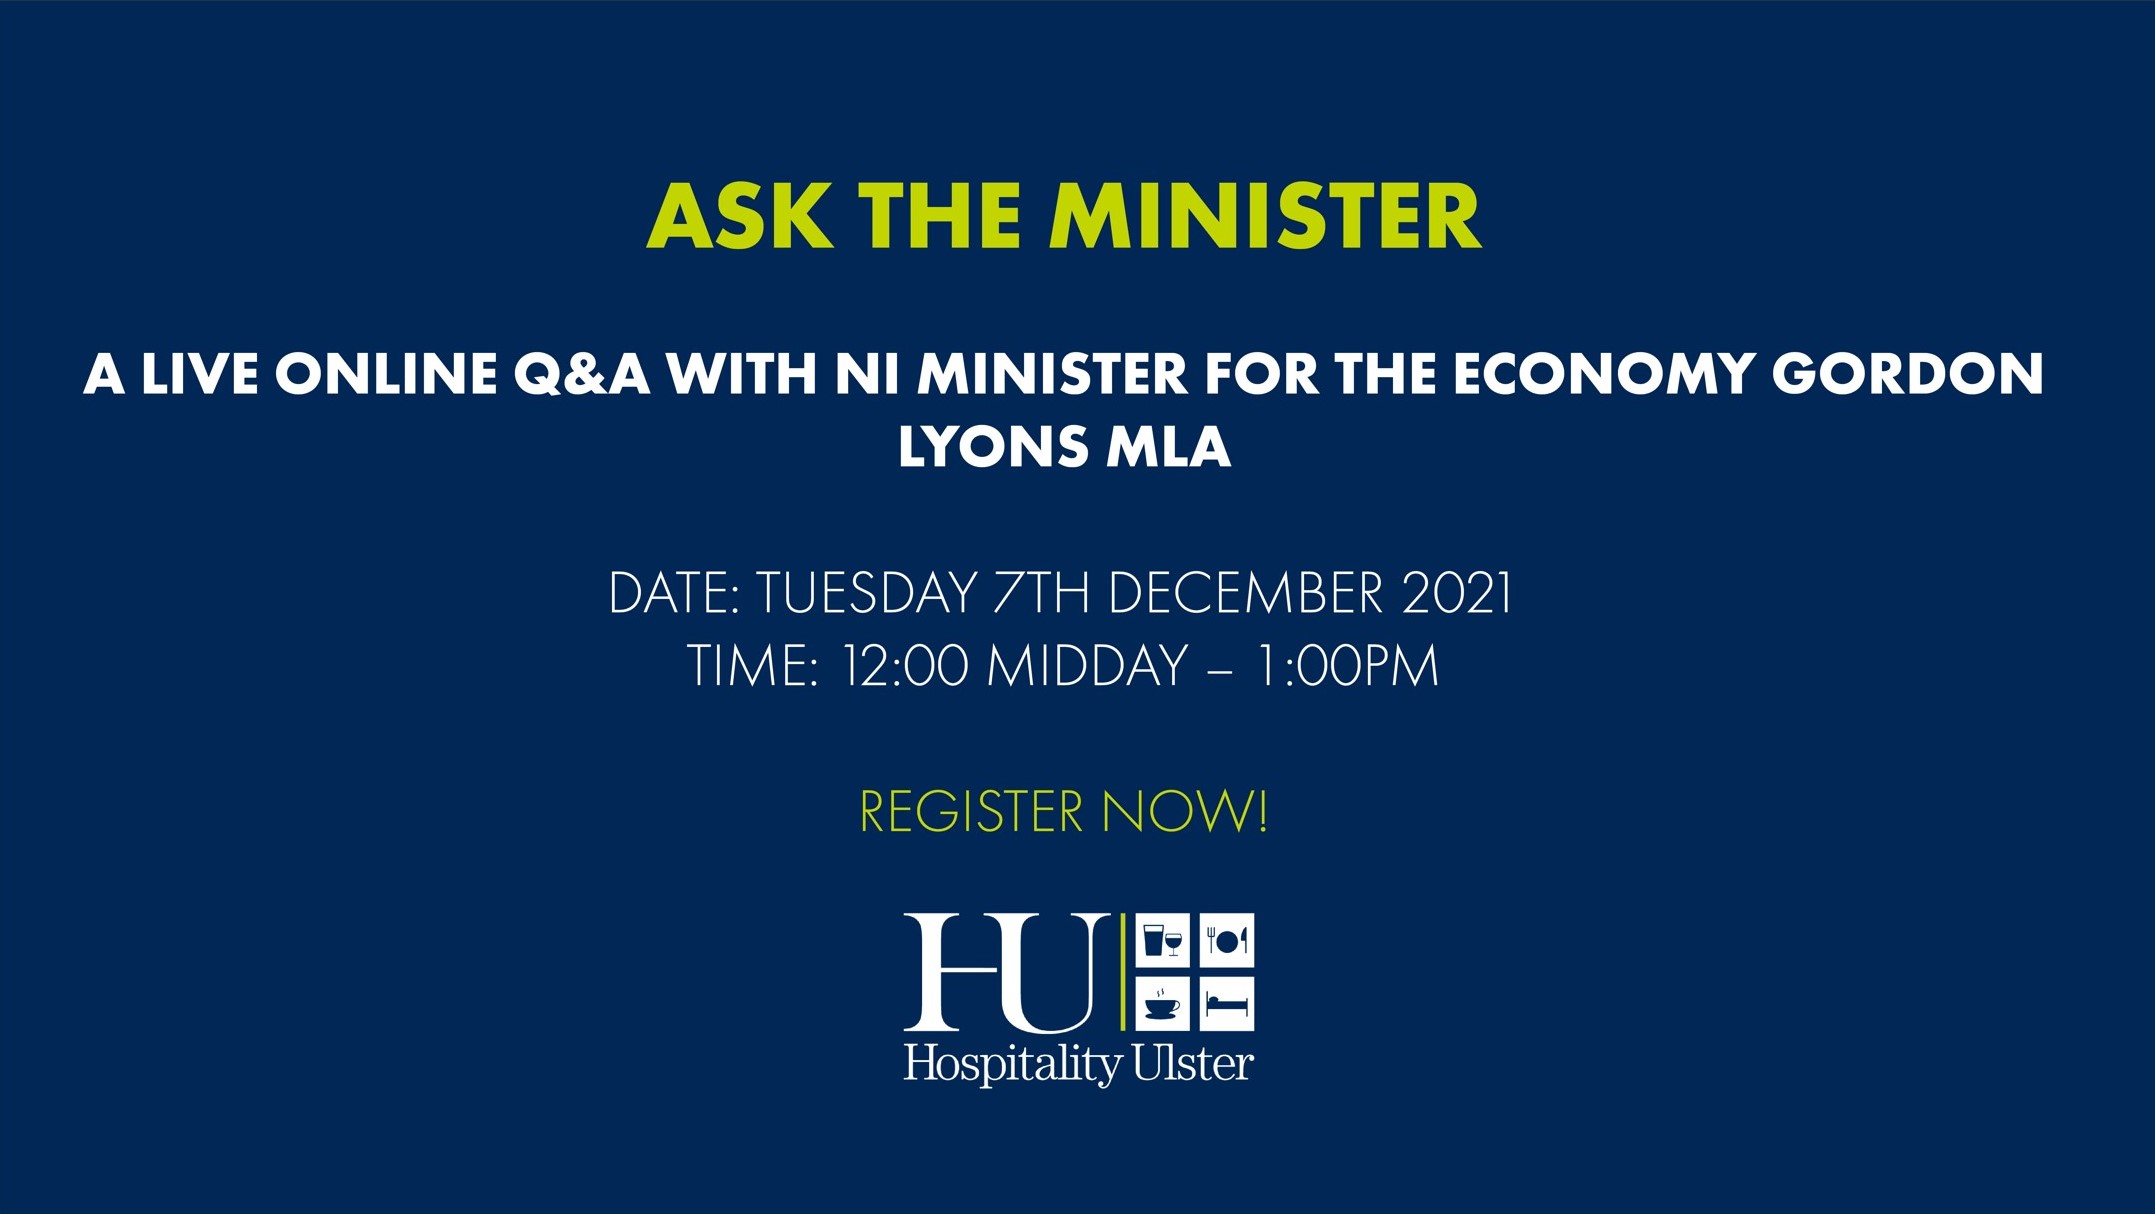 ASK THE MINISTER - LIVE ONLINE Q AND A WITH ECONOMY MINISTER GORDON LYONS MLA